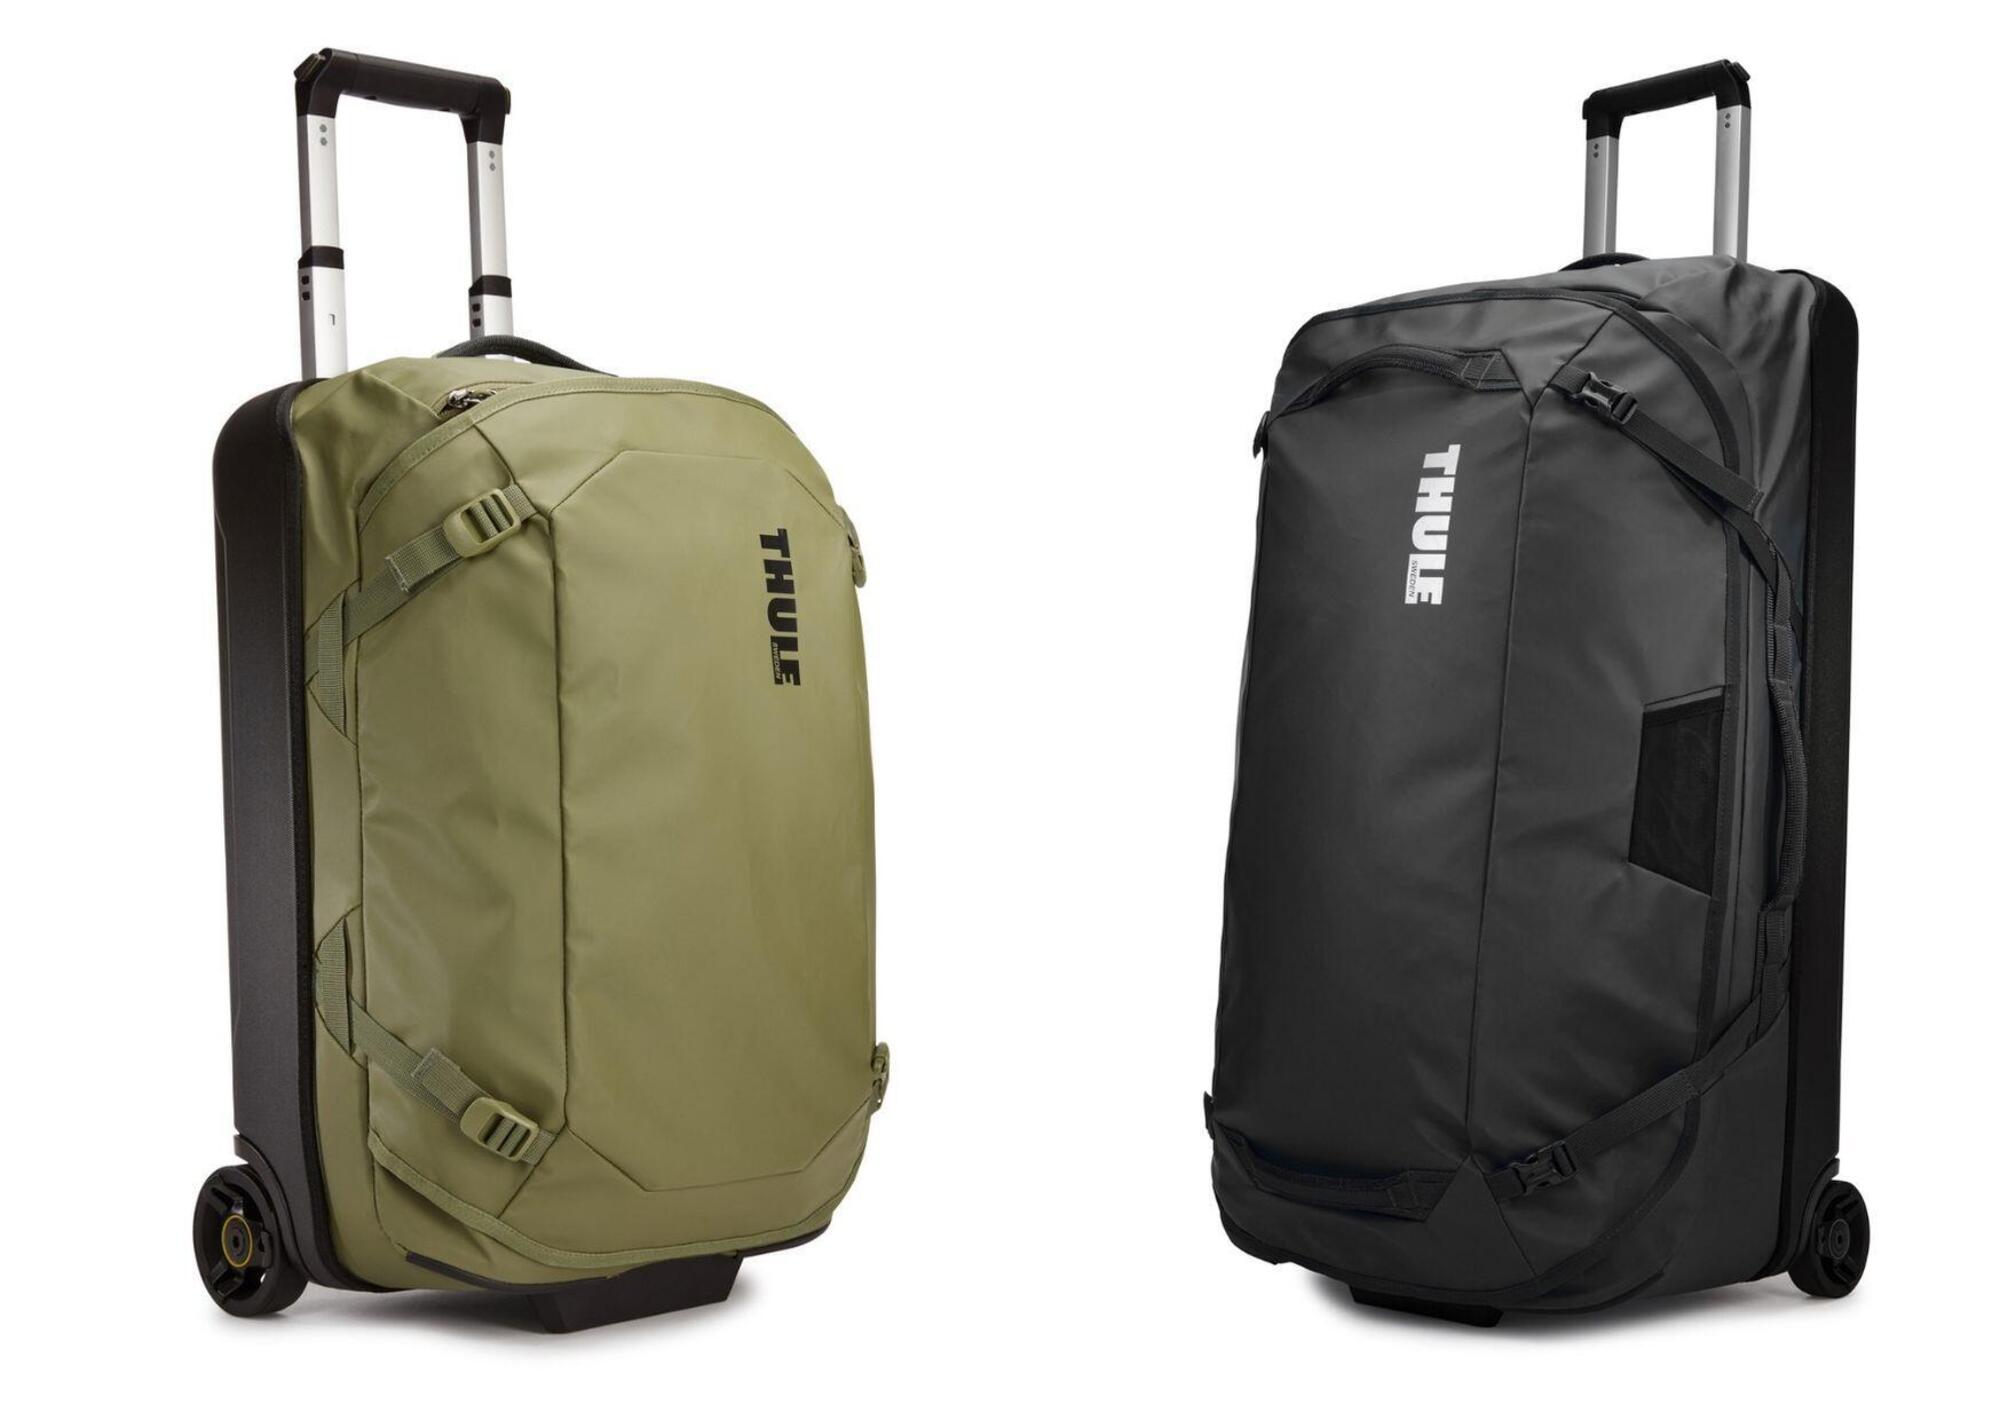 Thule Chasm Carry On e Thule Chasm